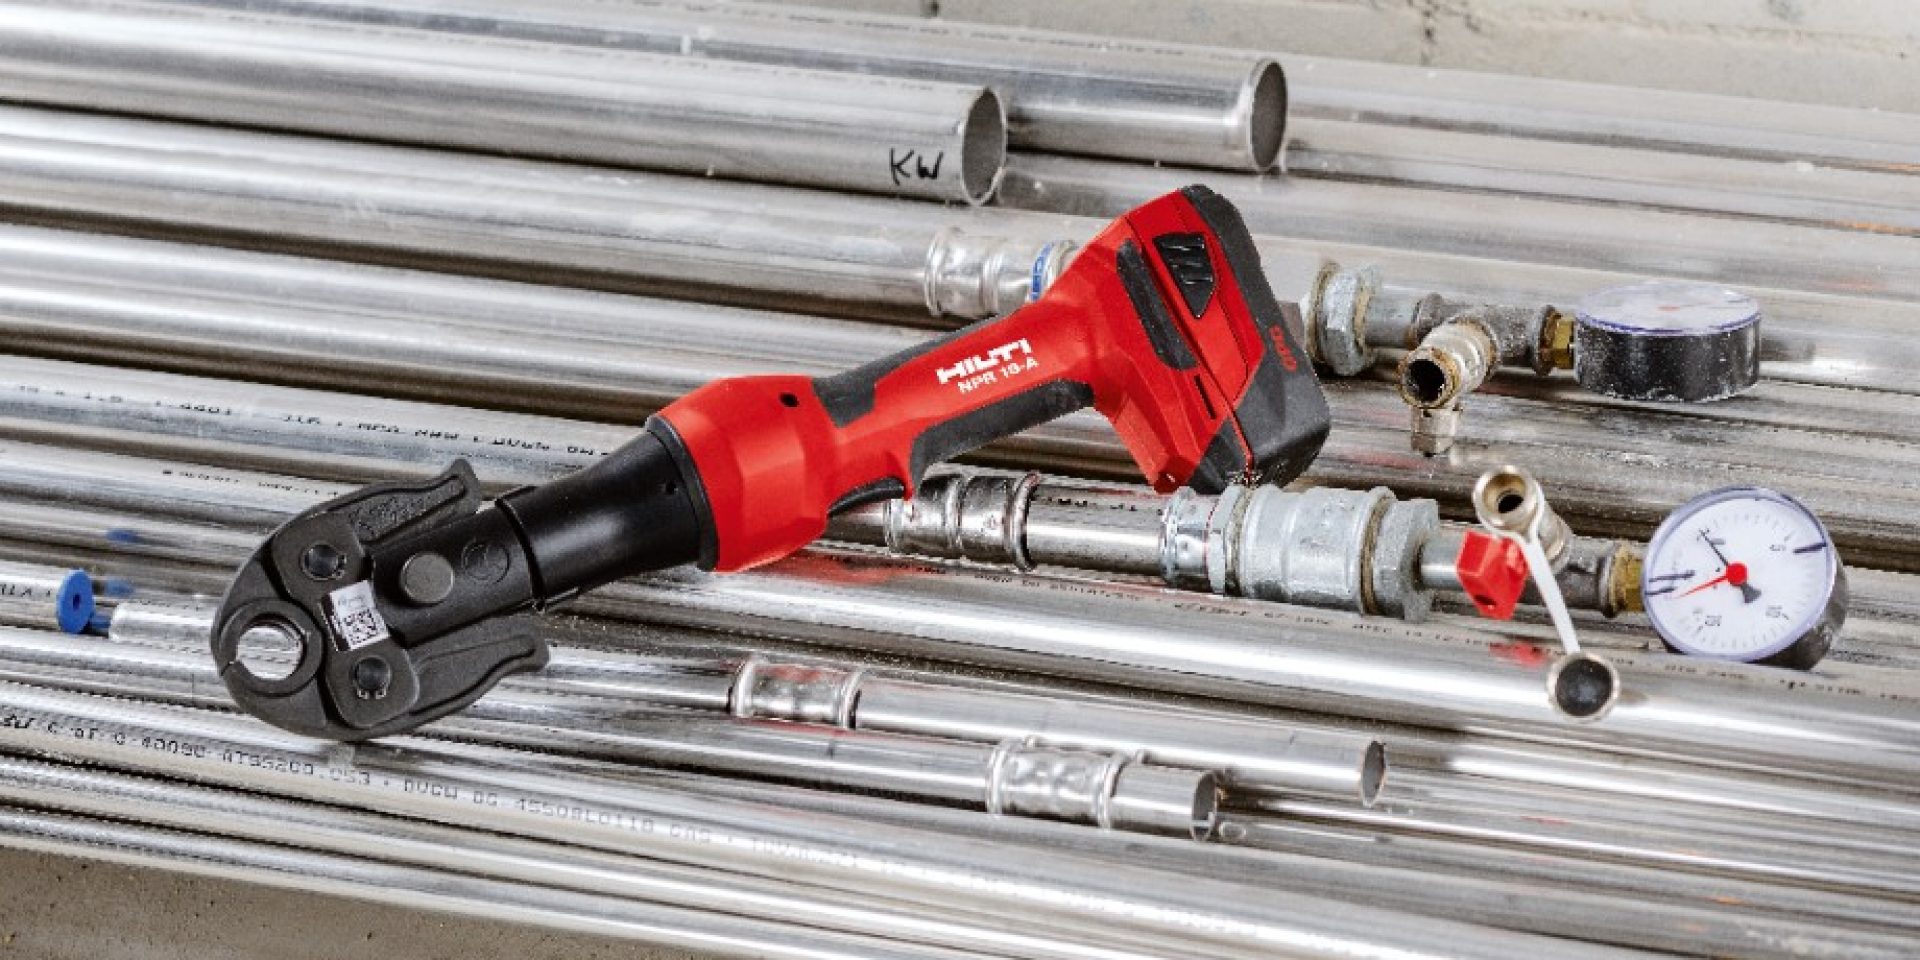 NPR 19-A cordless pipe press tool with batteries powerd by Cordless Power Care Technology